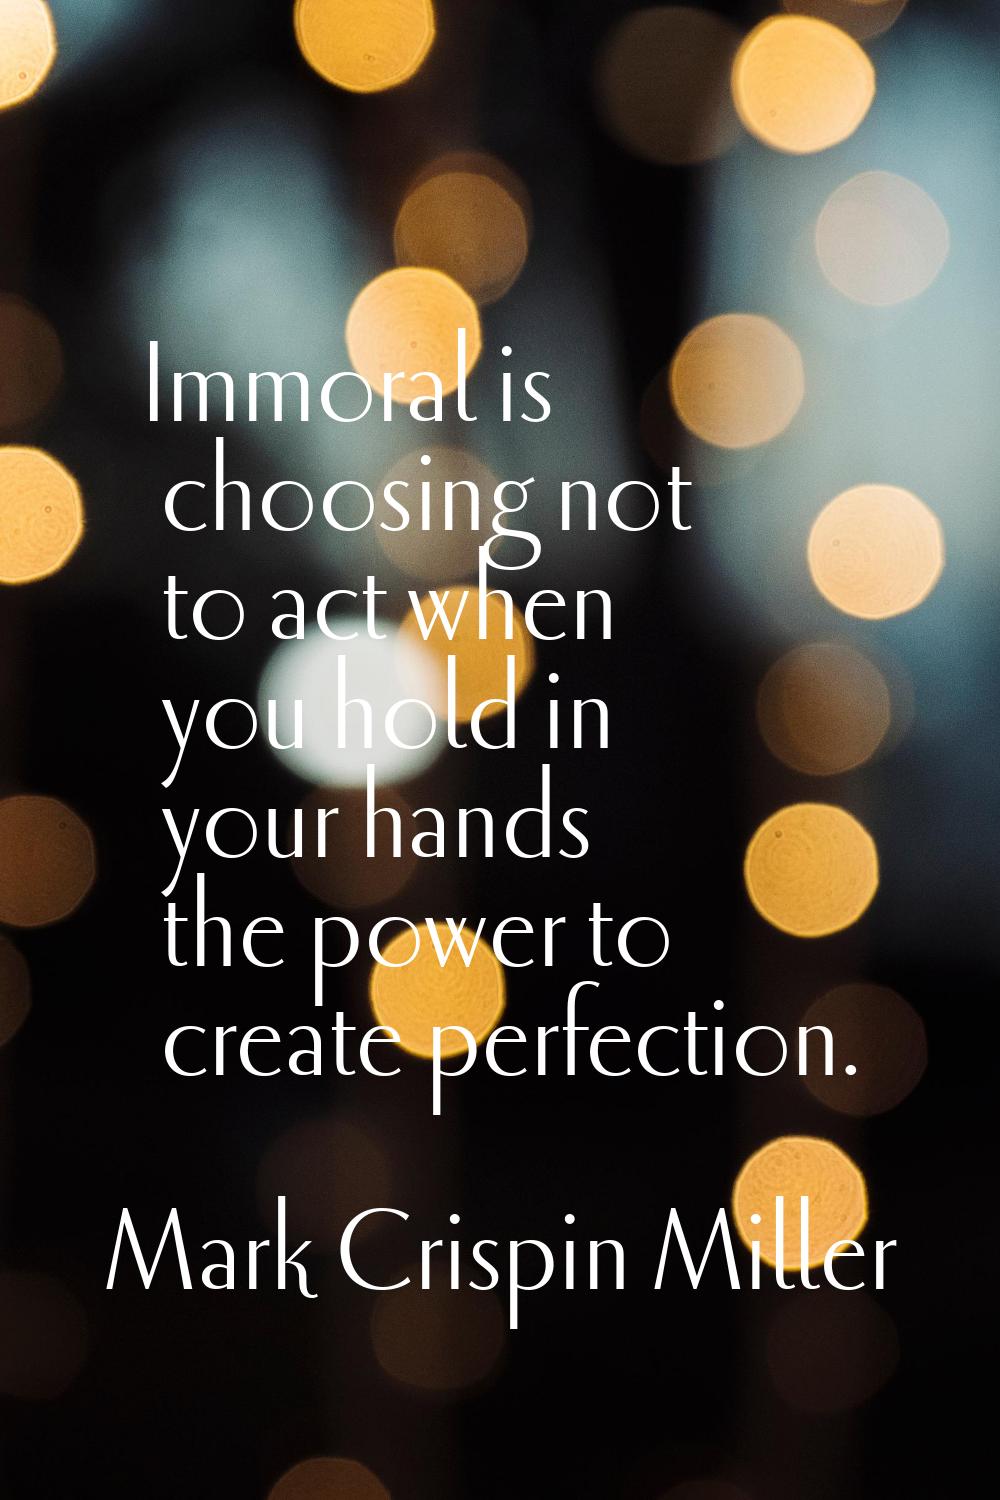 Immoral is choosing not to act when you hold in your hands the power to create perfection.